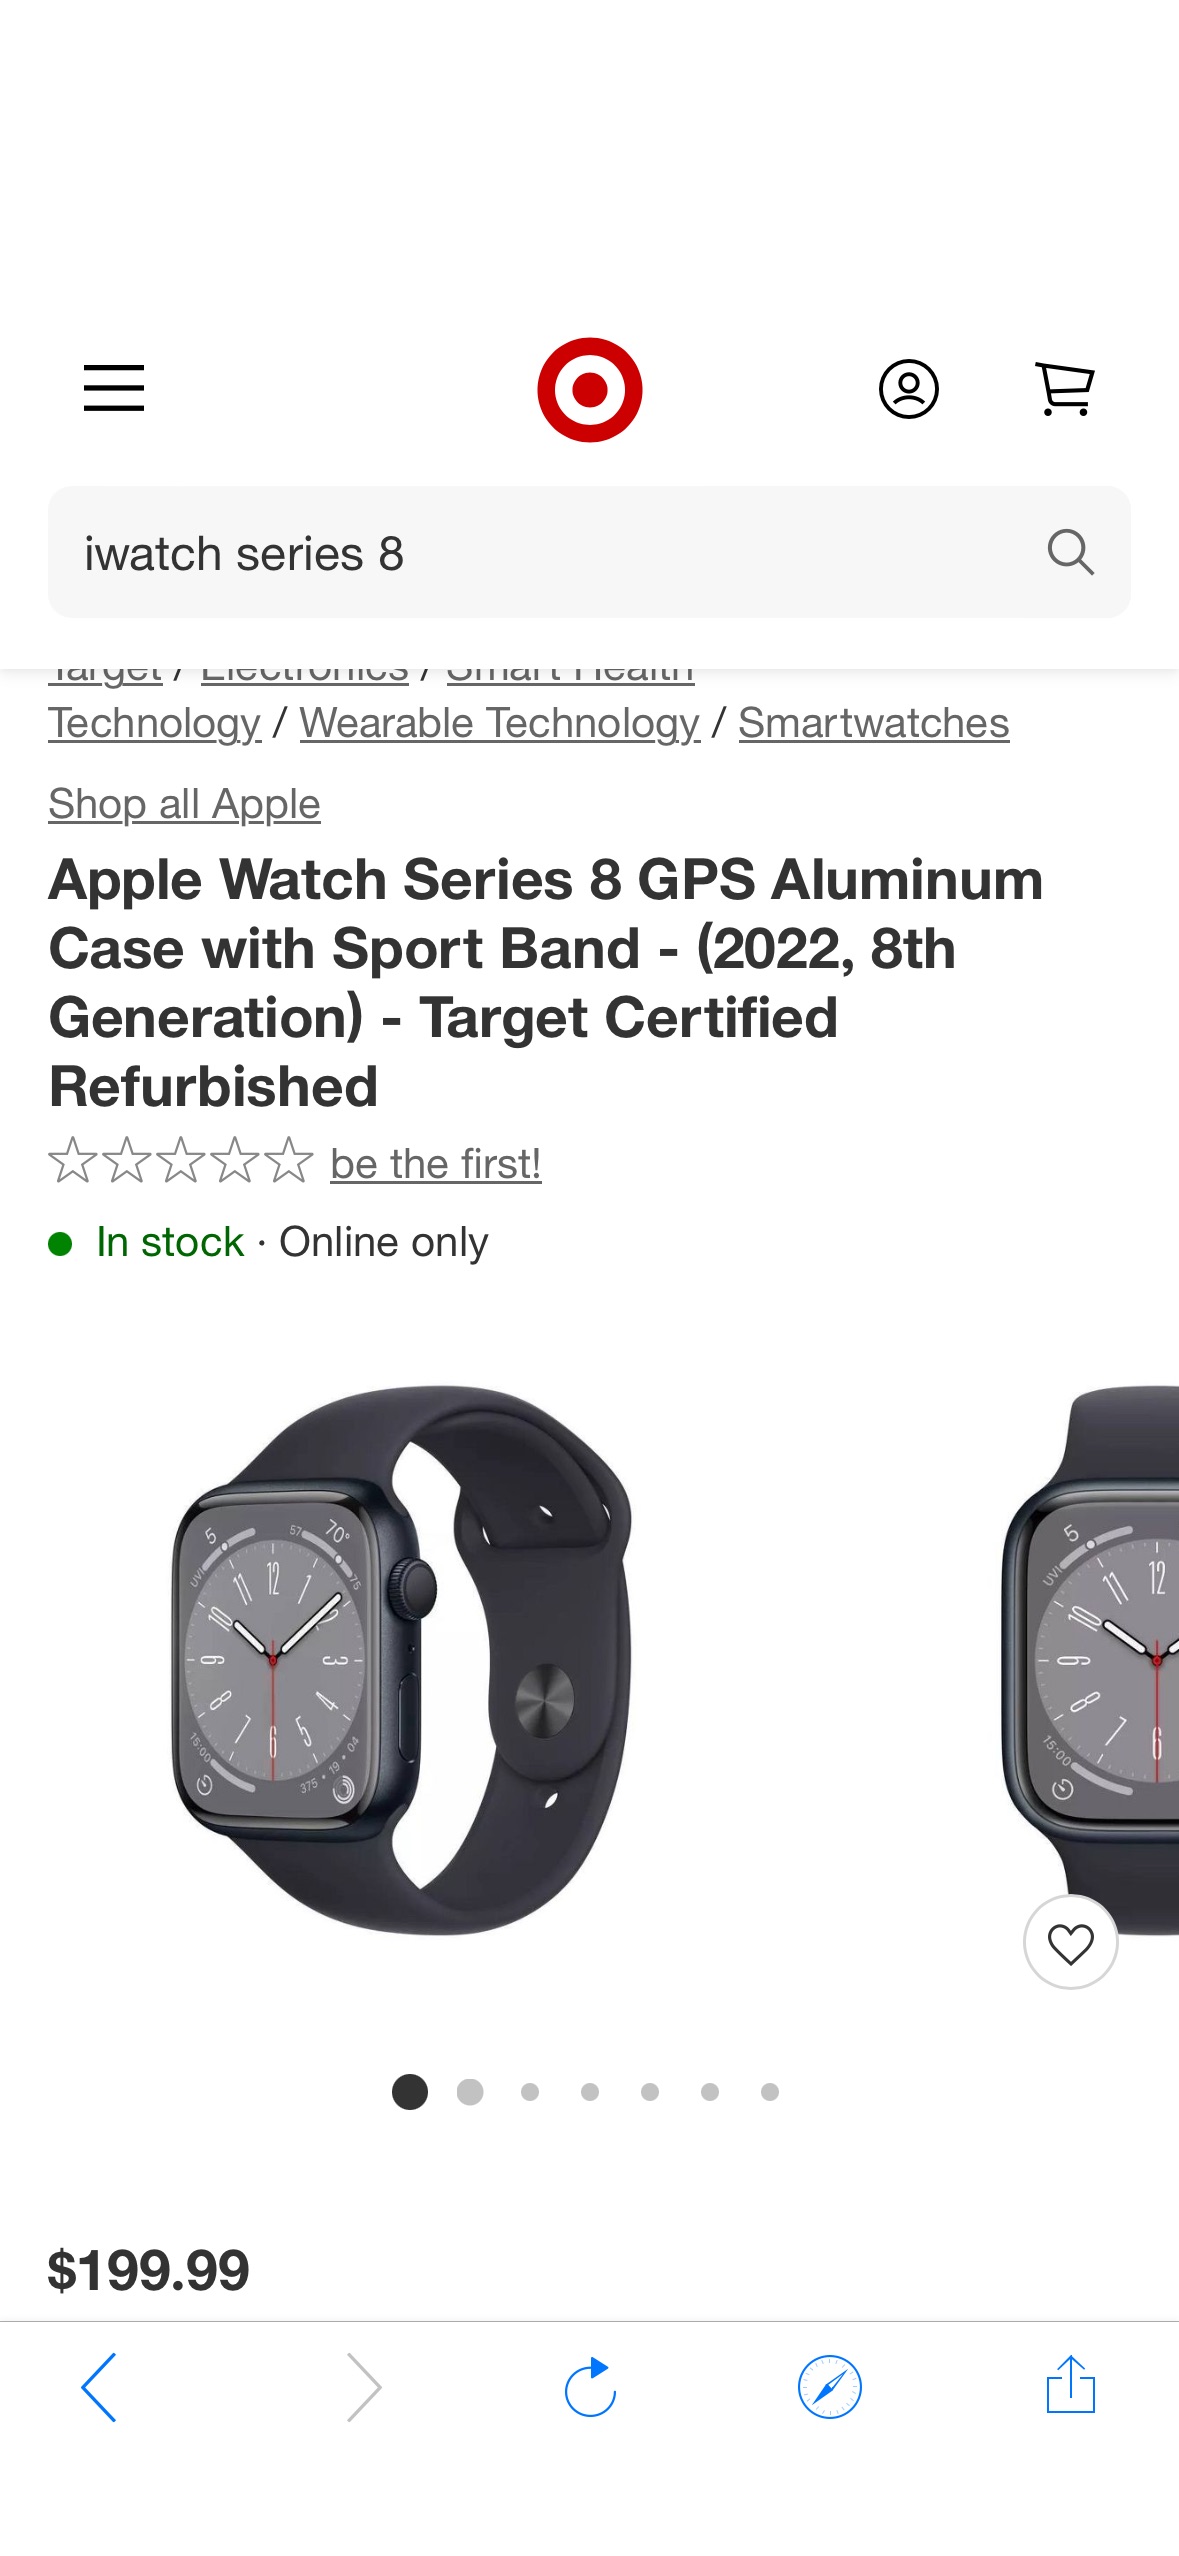 Apple Watch Series 8 Gps Aluminum Case With Sport Band - (2022, 8th Generation) - Target Certified Refurbished : Target苹果手表